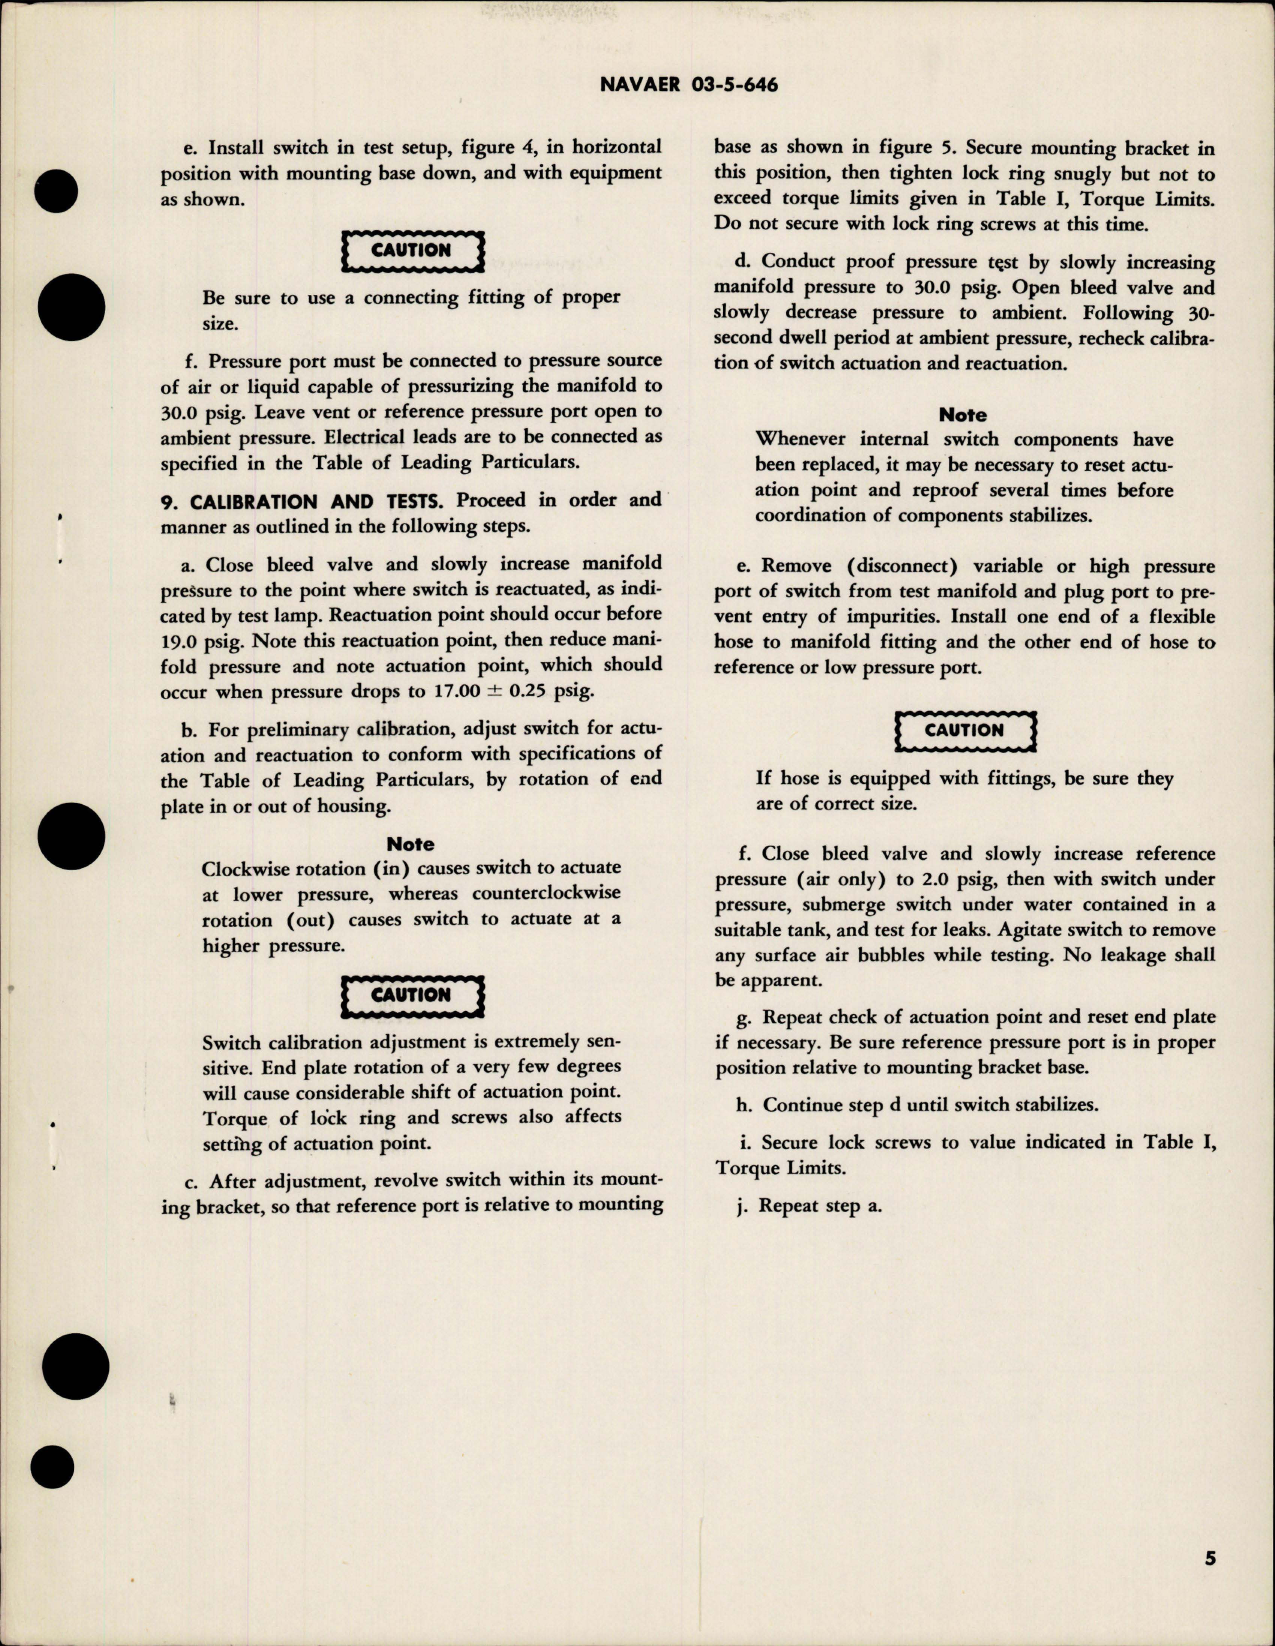 Sample page 5 from AirCorps Library document: Overhaul Instructions with Parts Breakdown for Pressure Actuated Switch - Part 417-11BL-61 